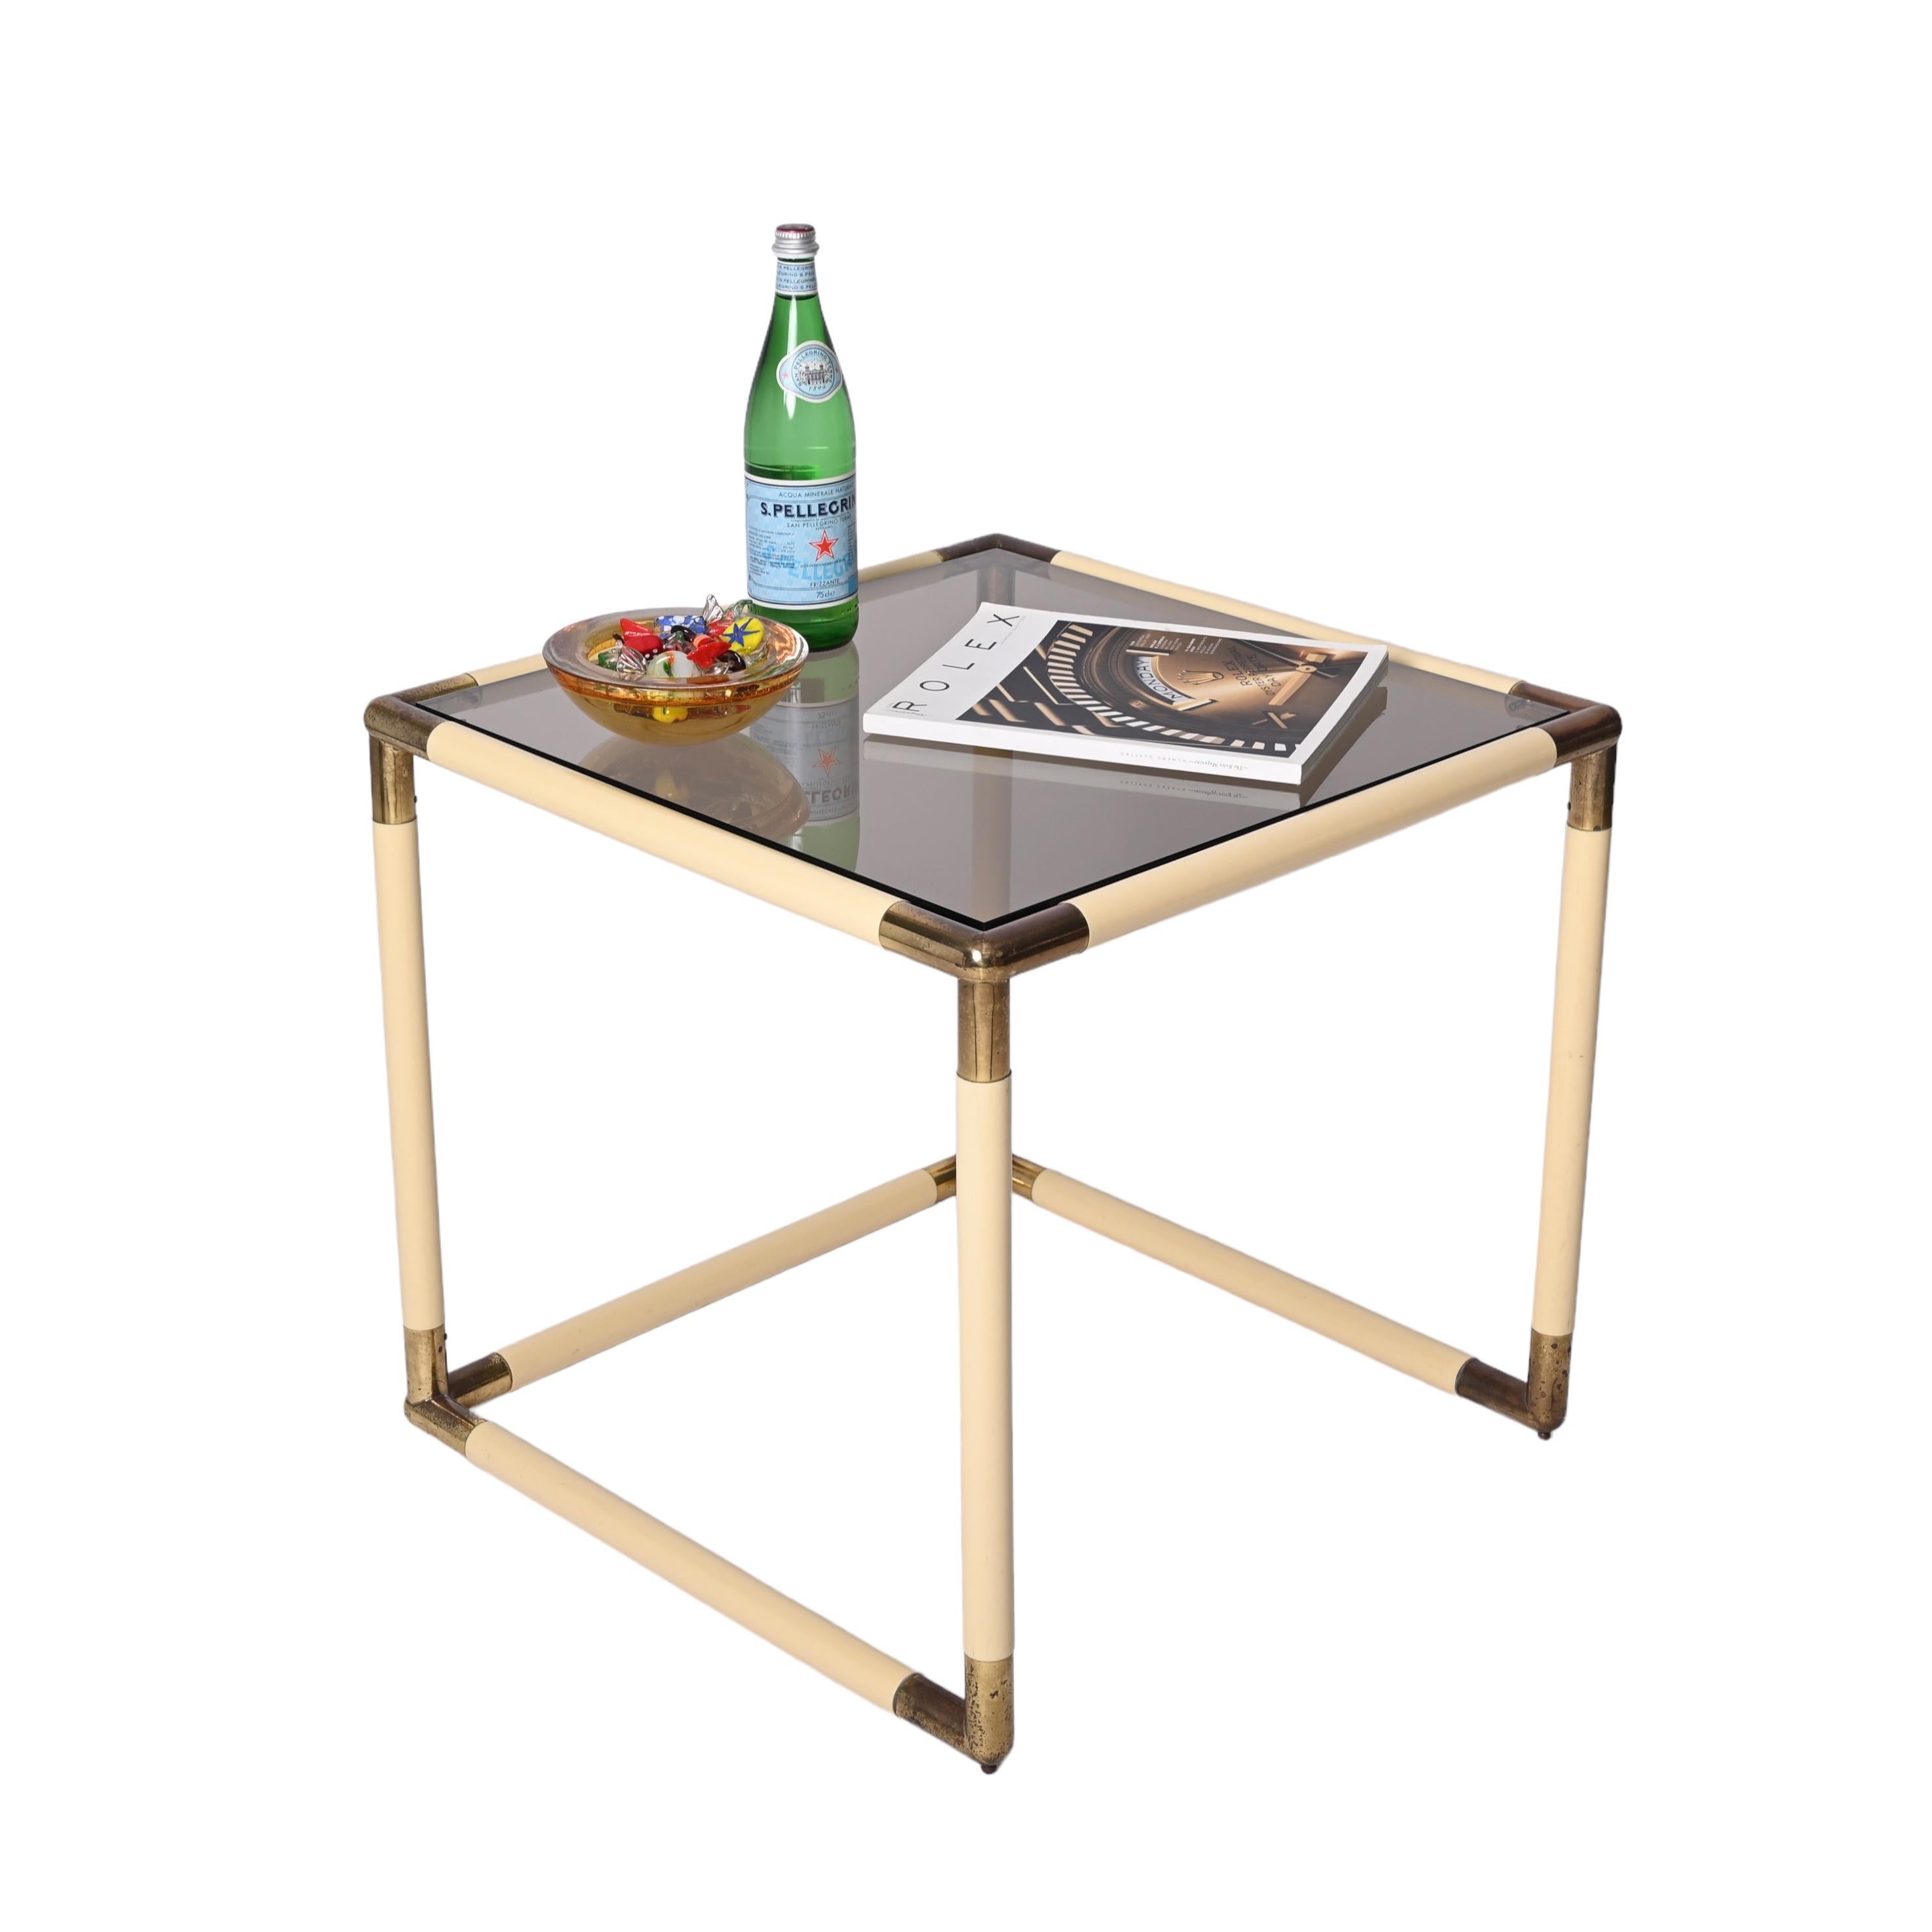 Midcentury cube shaped coffee table designed by Tommaso Barbi and produced in Italy in the 1970s.

The coffee table is made in a lovely cream enamelled metal, with brass angles and smoked glass top. The patina on the brass corners make it even